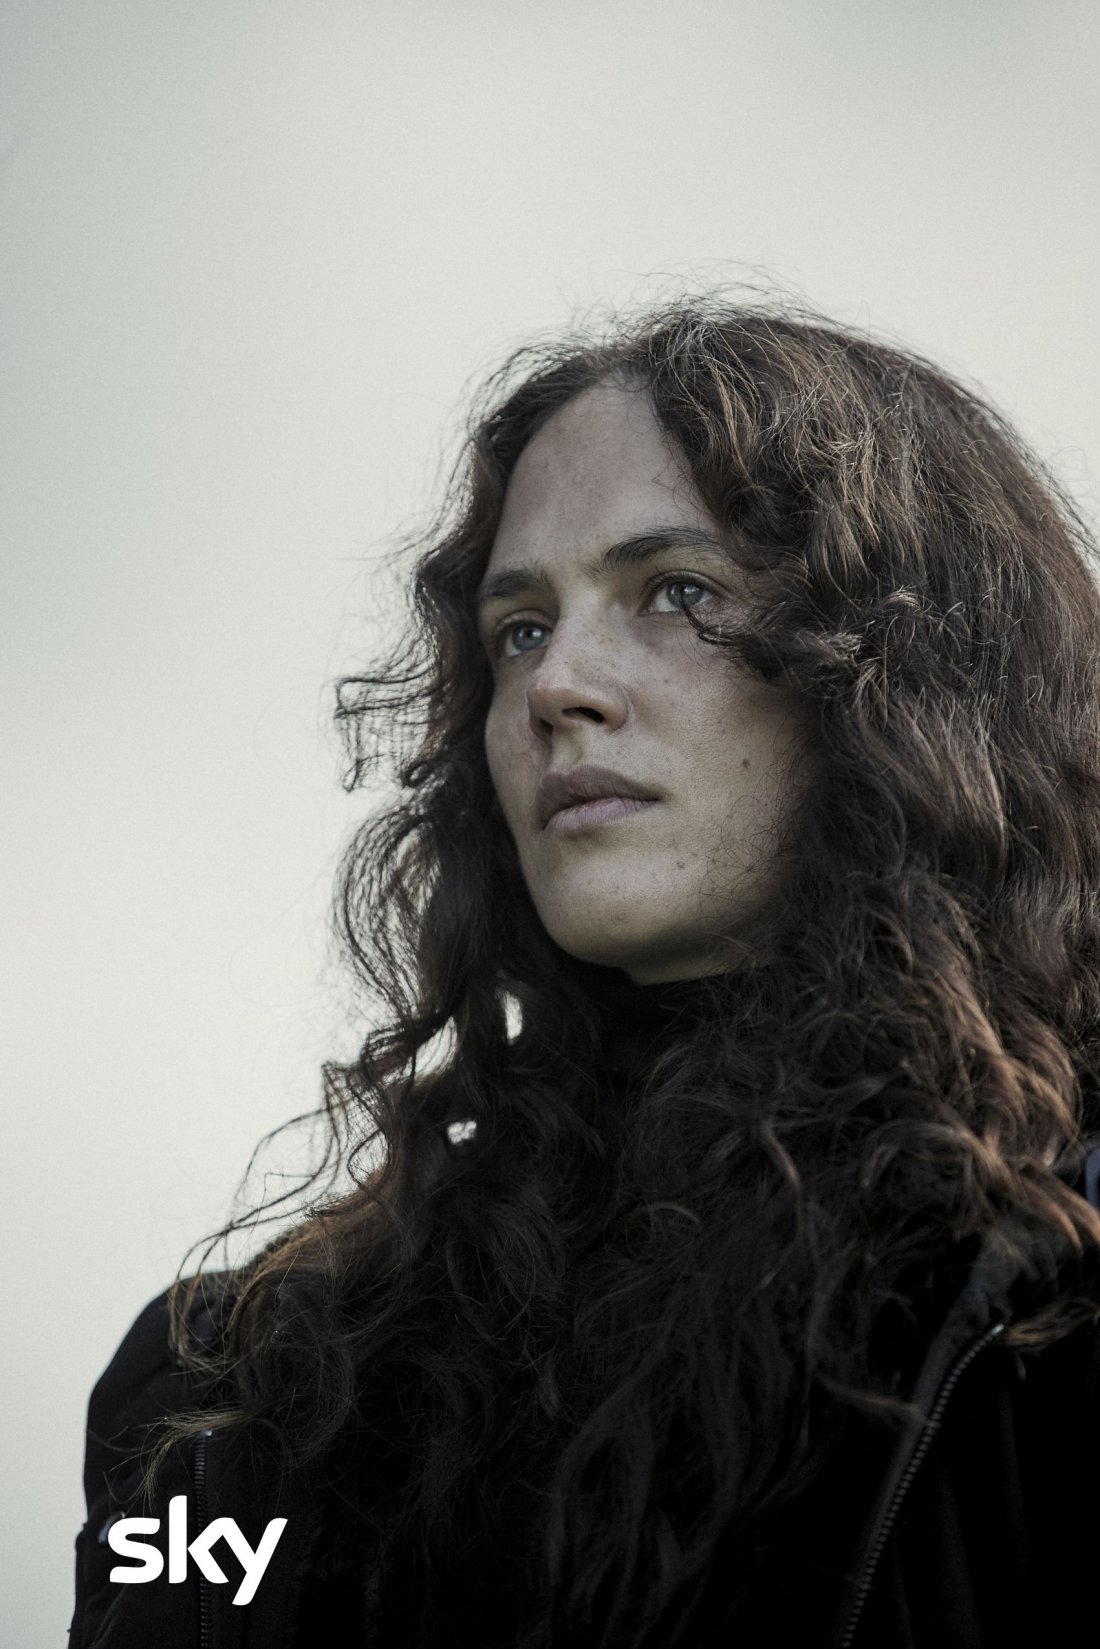 The Hanging Sun Jessica Brown Findlay 2